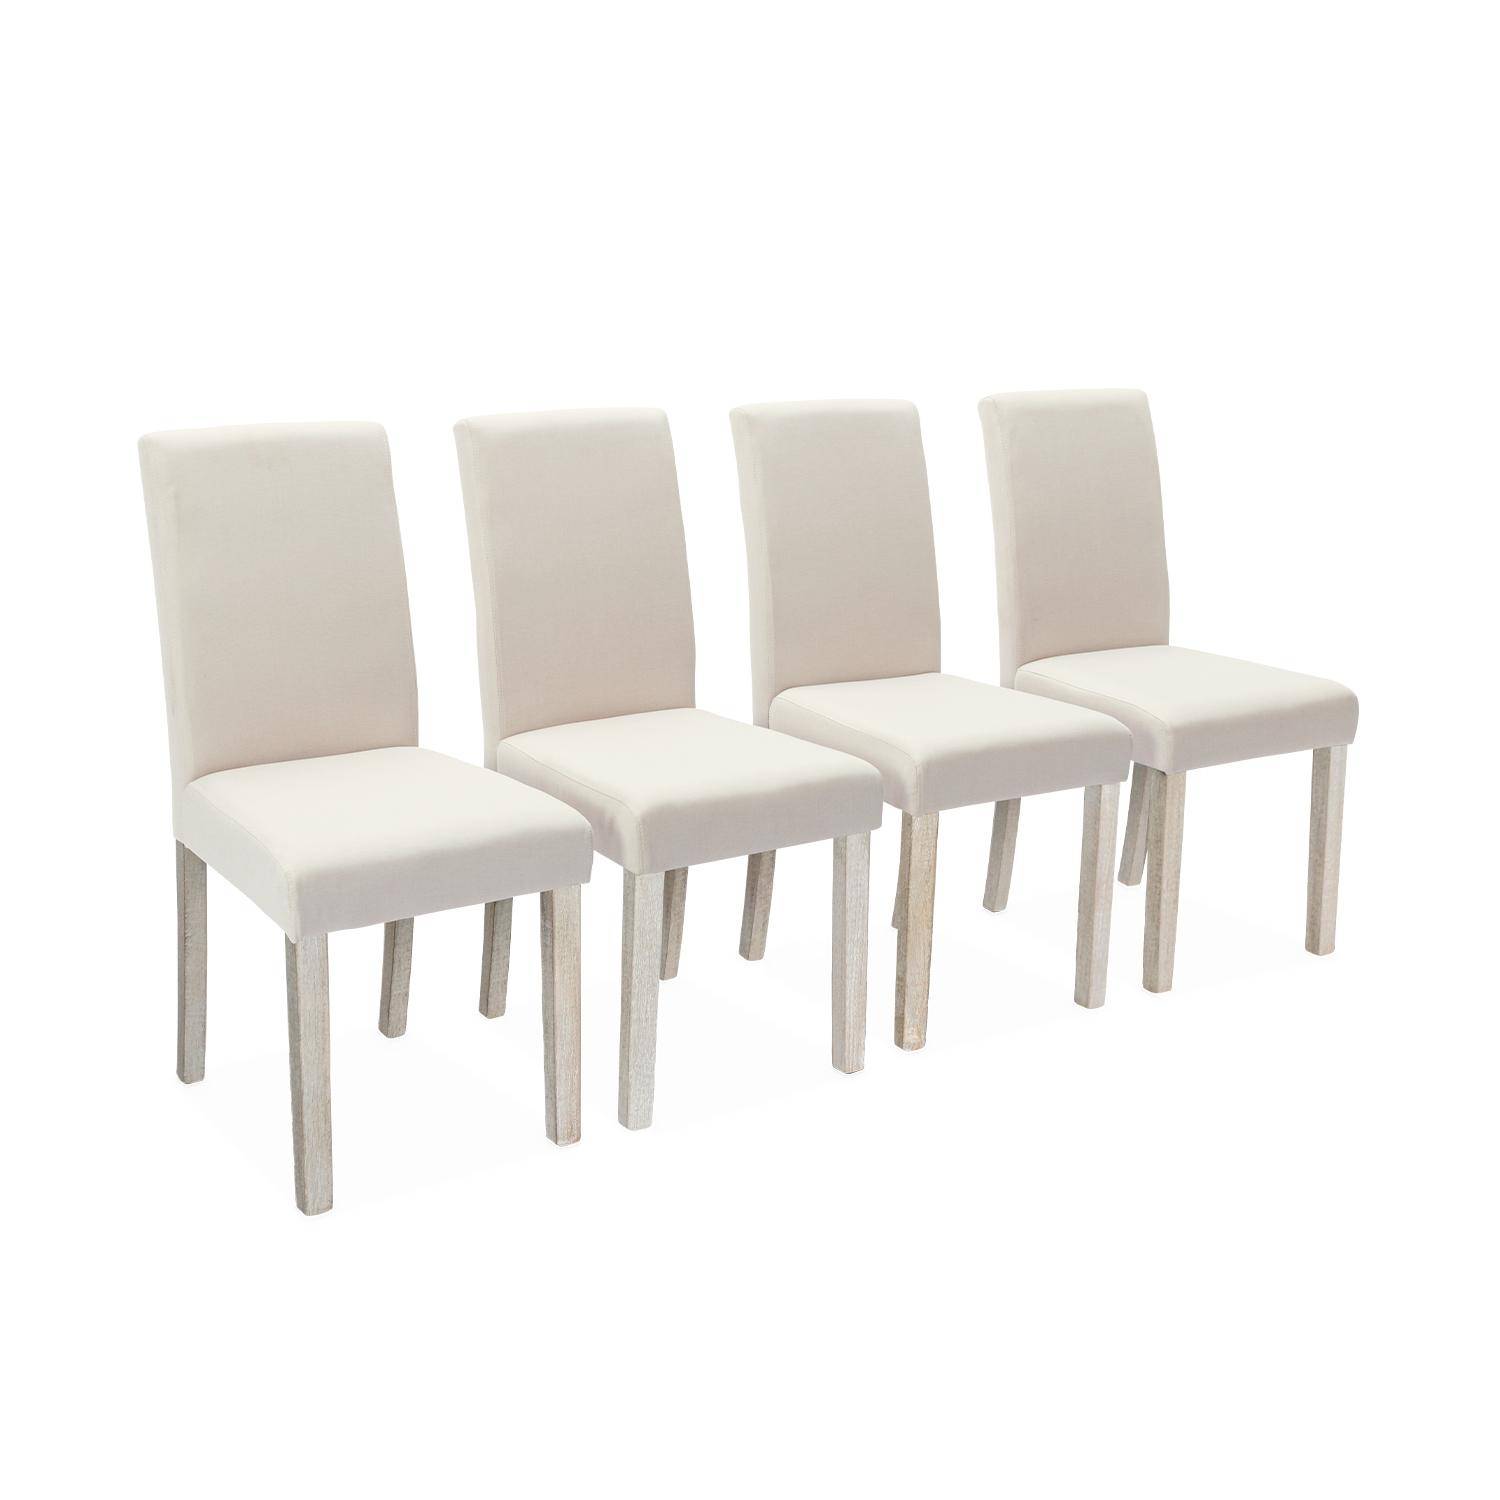 Set of 4 fabric dining chairs with wooden legs - Rita - Beige,sweeek,Photo2